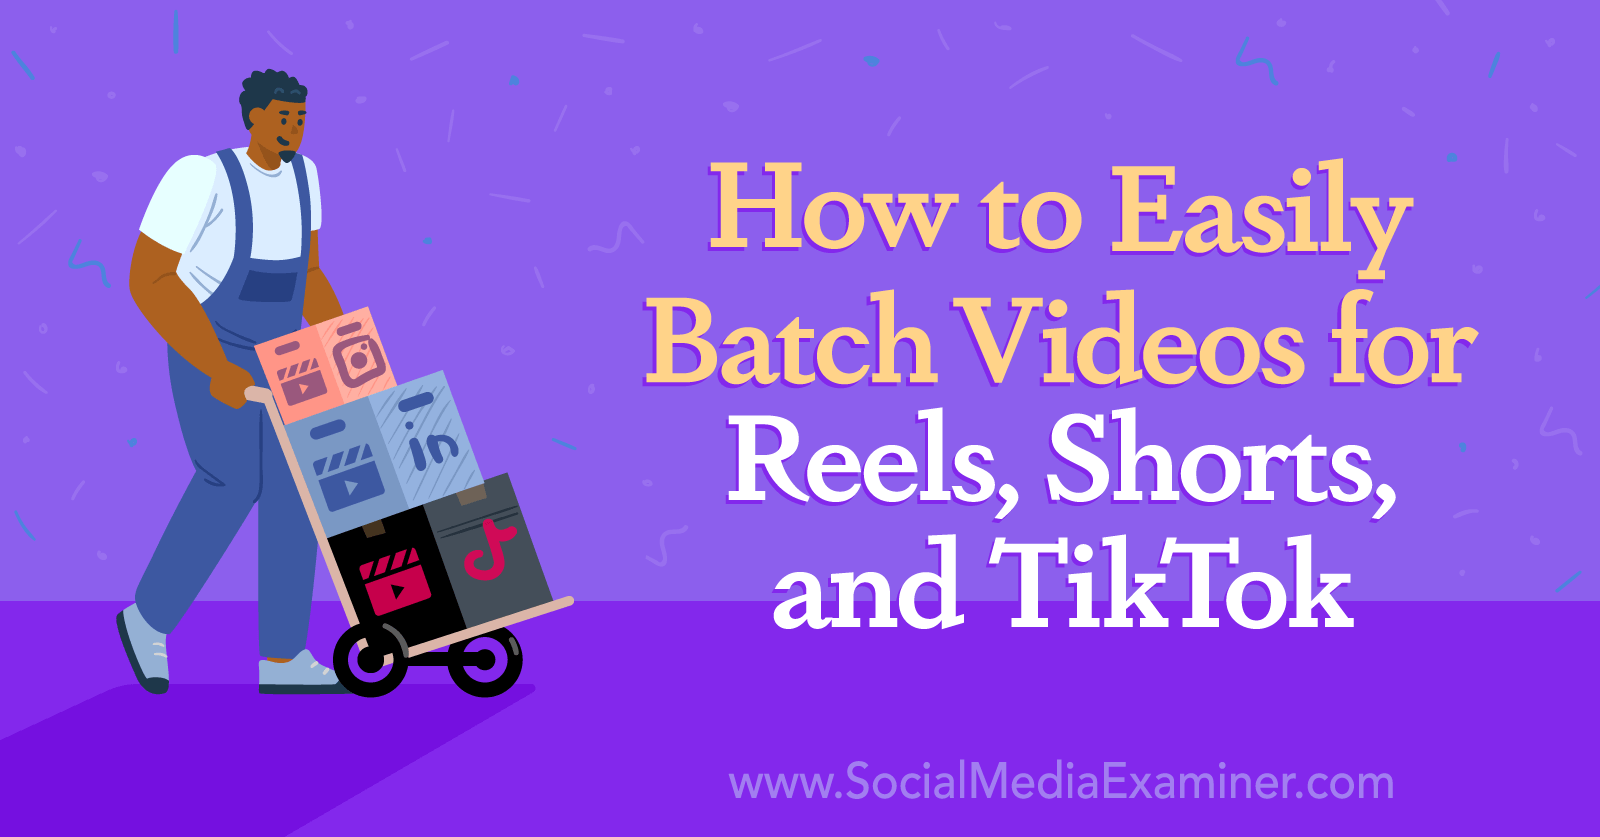 How to Easily Batch Videos for Reels, Shorts, and TikTok-Social Media Examiner